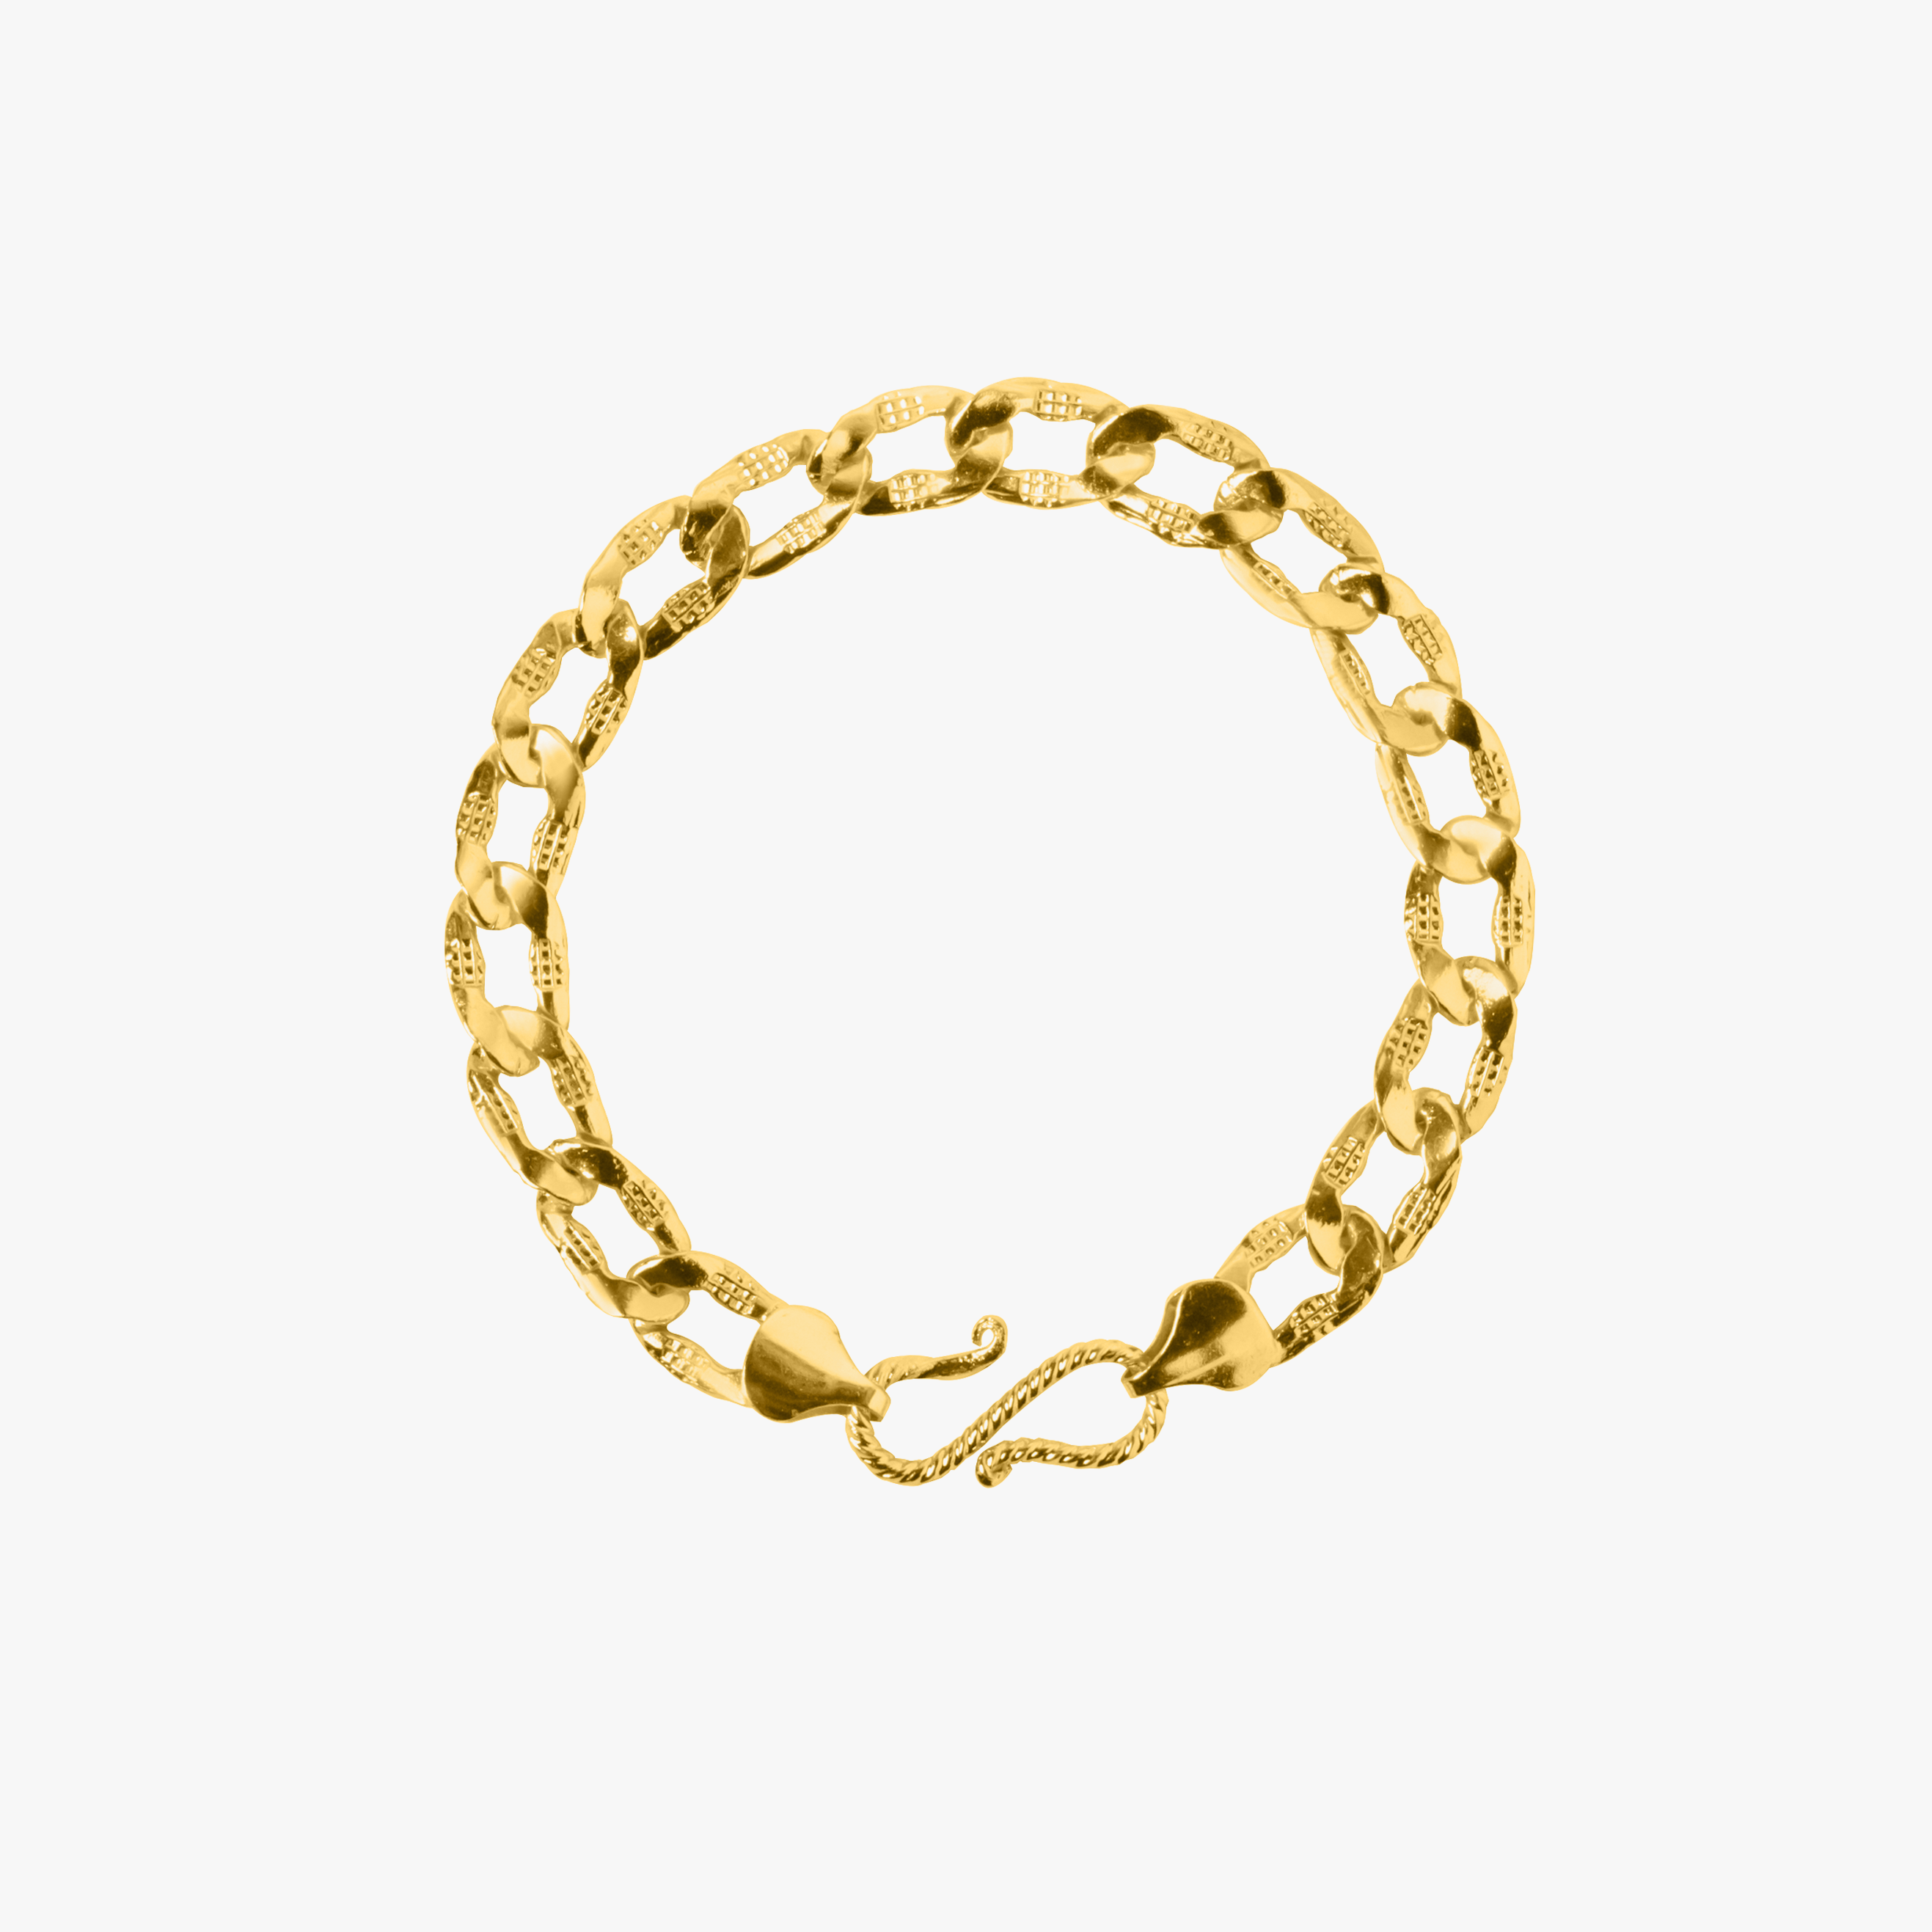 GOURMETTE BRACELET GOLD TONE , a product by Equiivalence